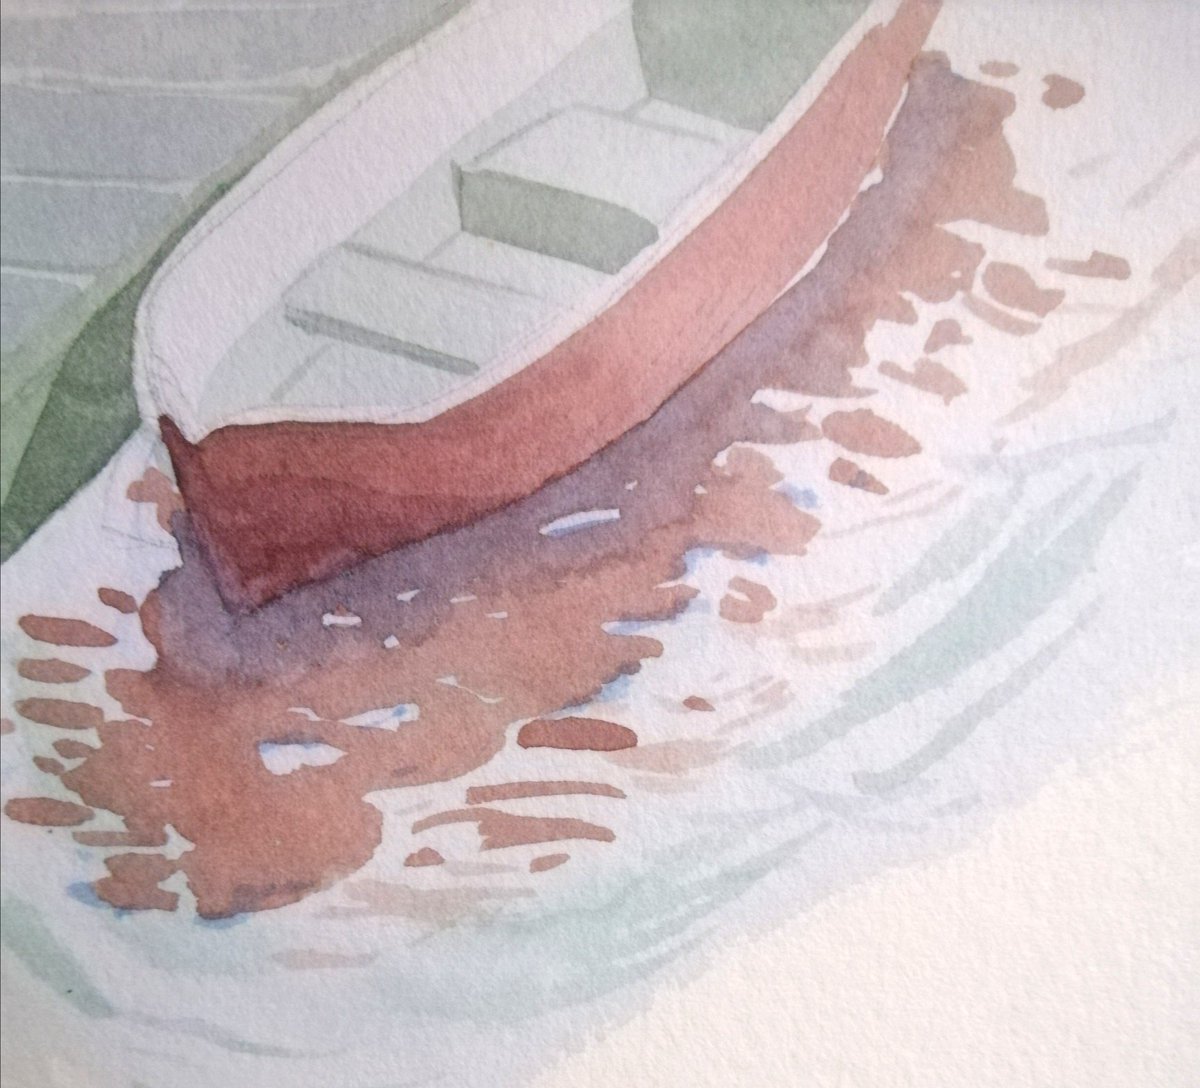 Painting a watercolor landscape is sth new to me